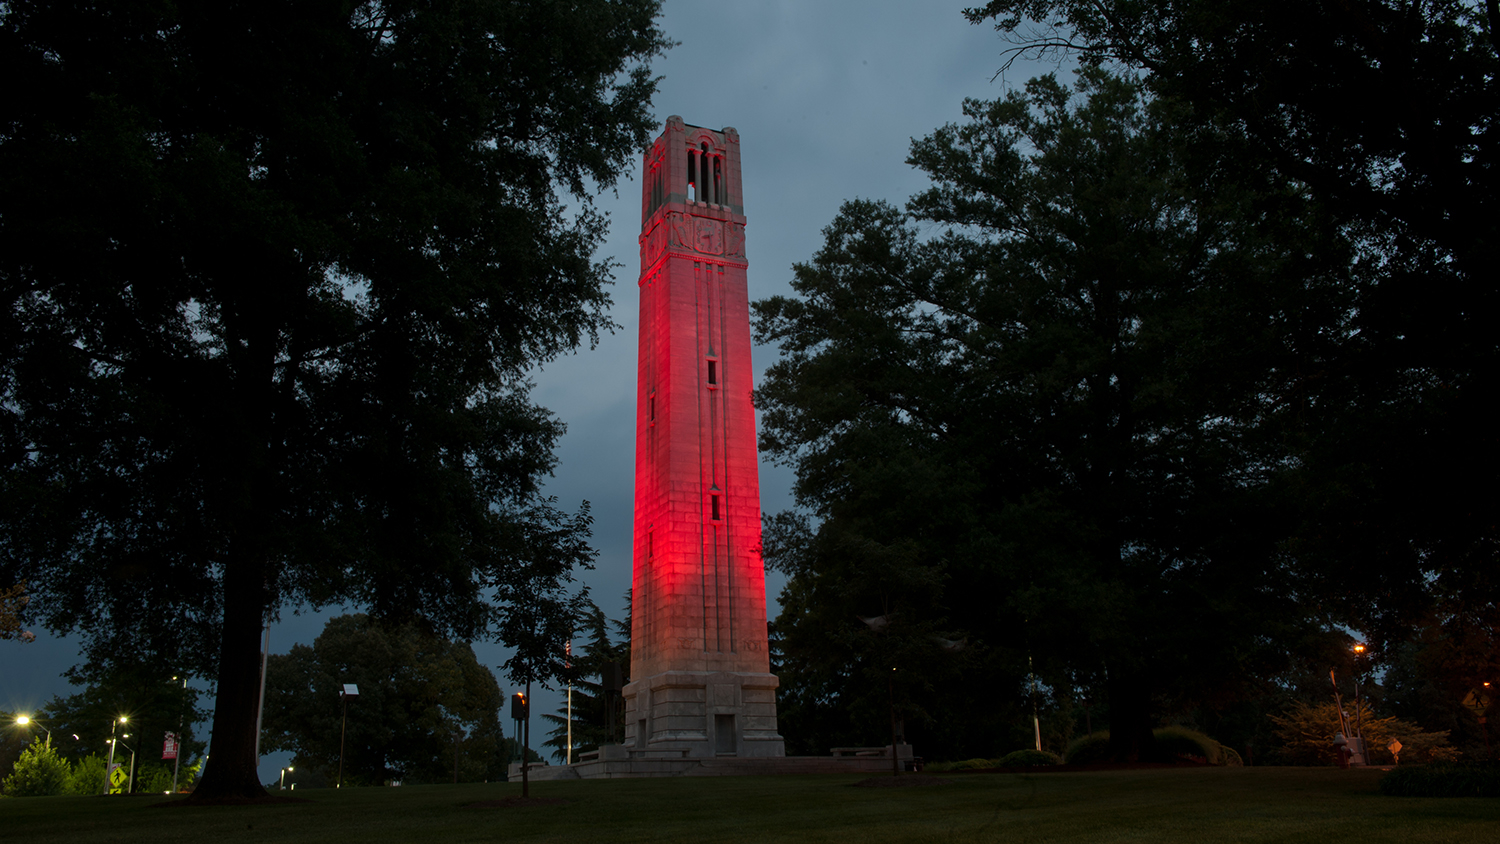 Looking up at the NC State belltower that is lit in red.